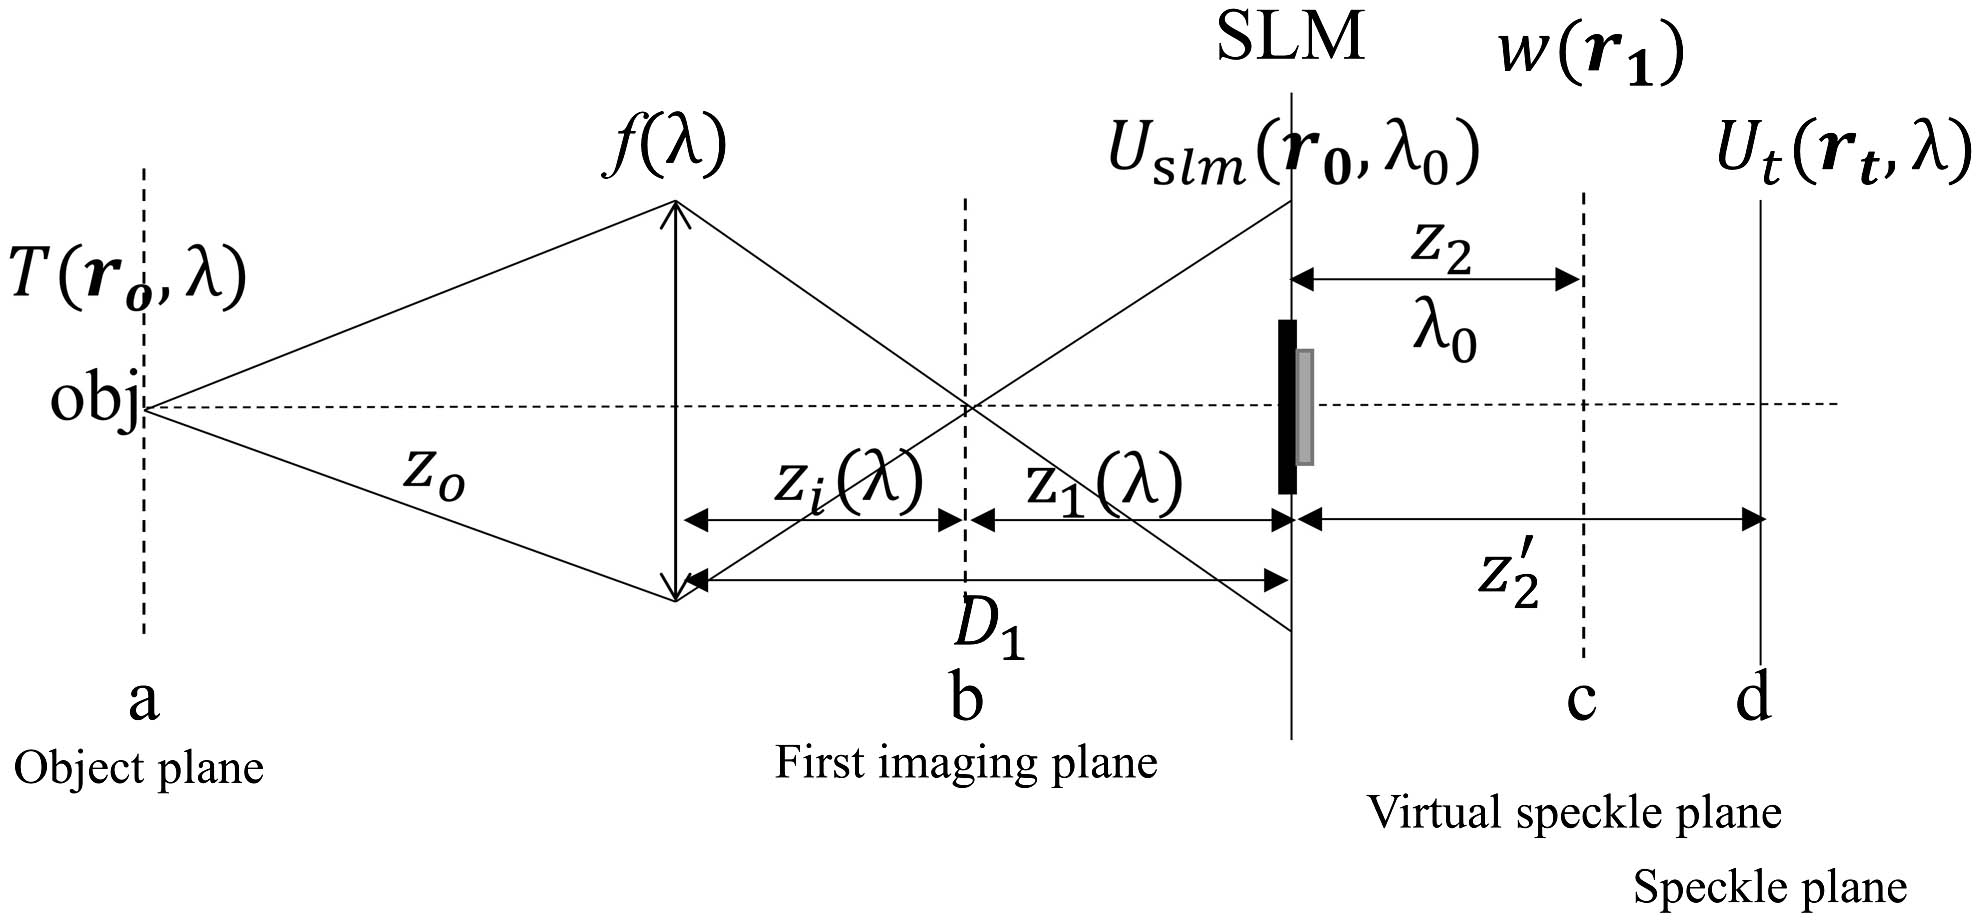 Schematic of snapshot spectral ghost imaging with broadband super-Rayleigh speckles. (a) is the object plane; (b) is the first imaging plane; (c) is the virtual speckle plane; (d) is the speckle plane.